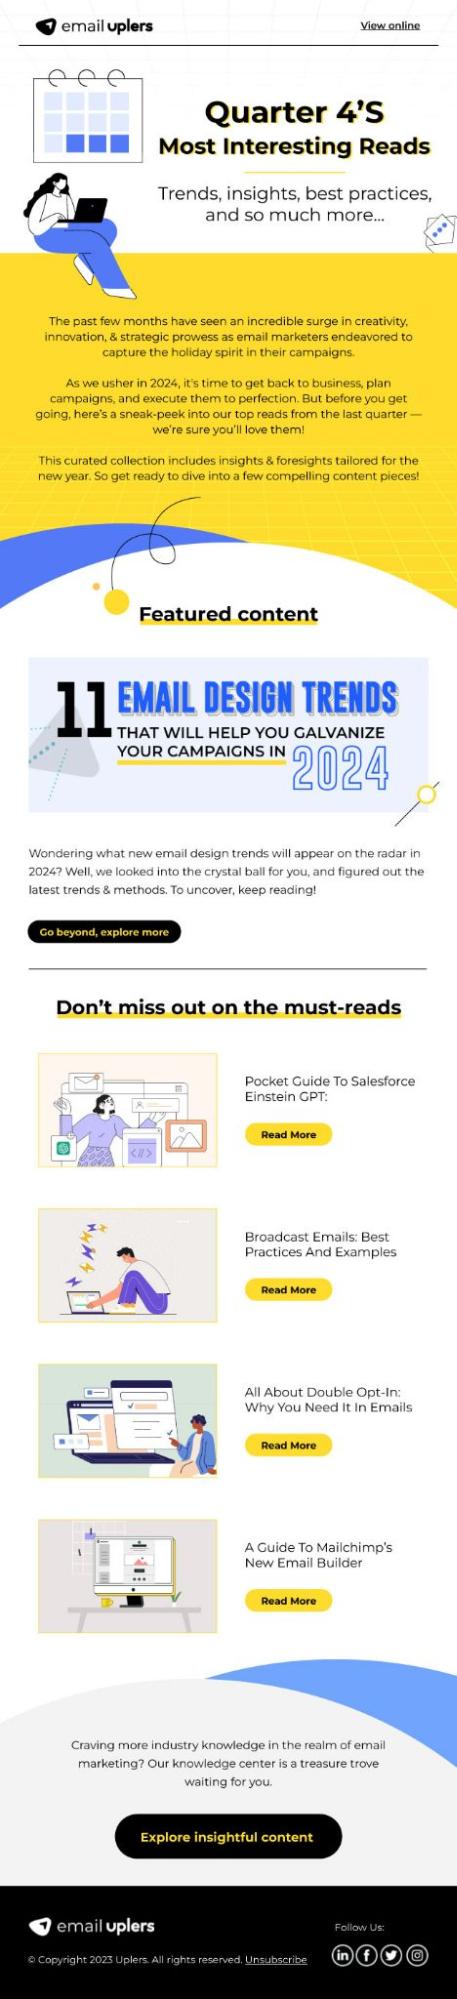 branded email template by Email Uplers